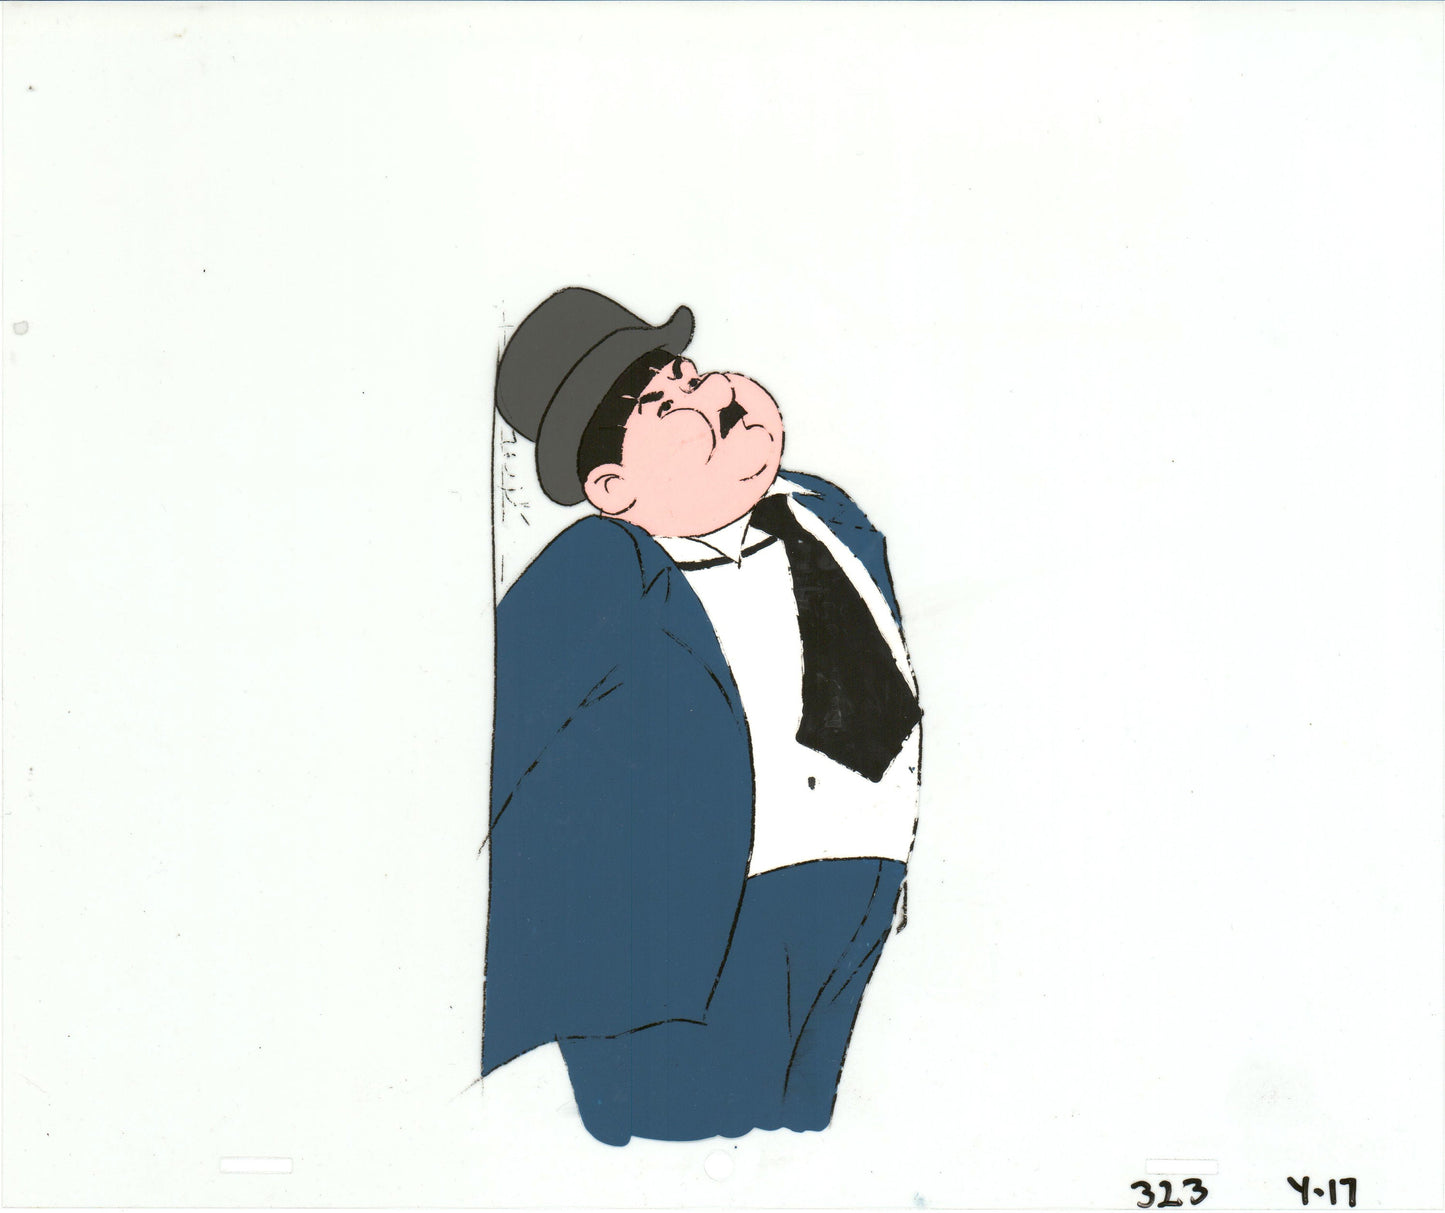 SCOOBY DOO 1972 Oliver Hardy Production Animation Cel from Hanna Barbera 282